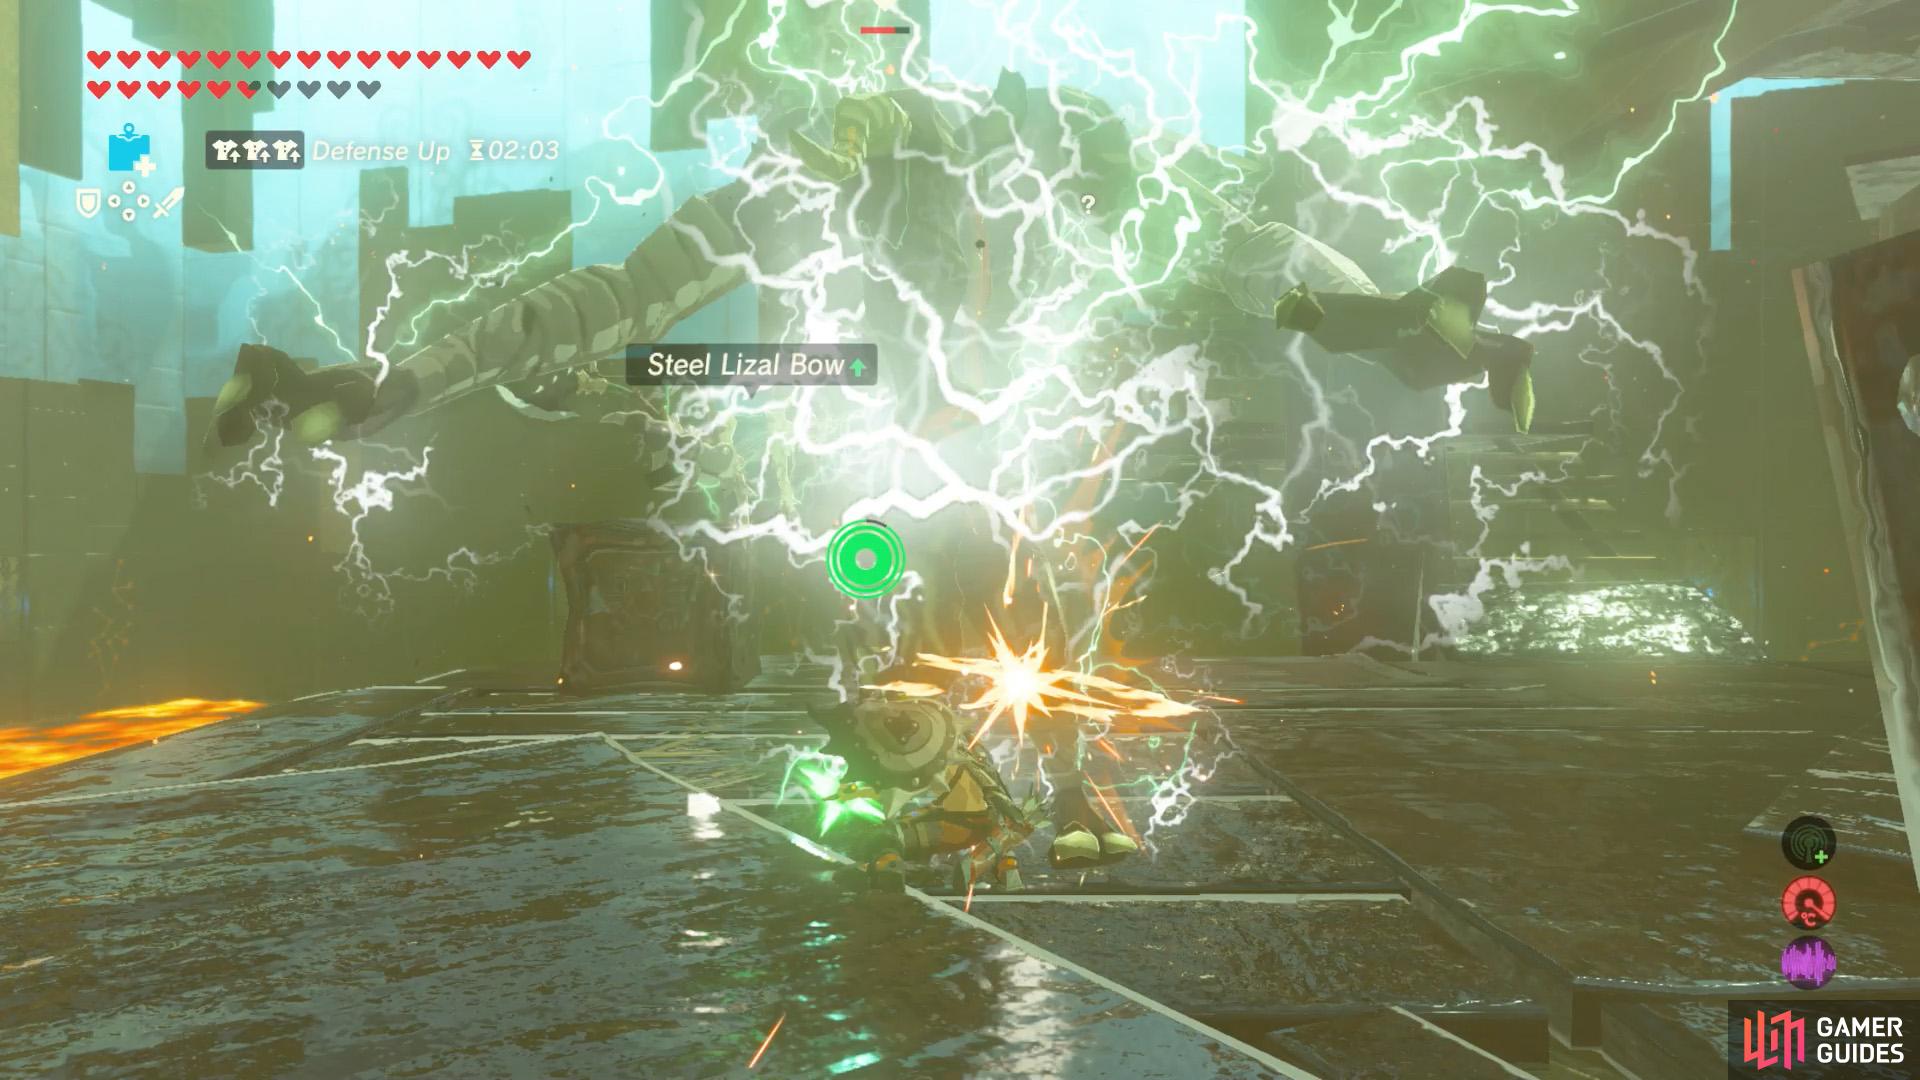 Otherwise, glide towards the Moblin and disarm it with the Thunderblade.